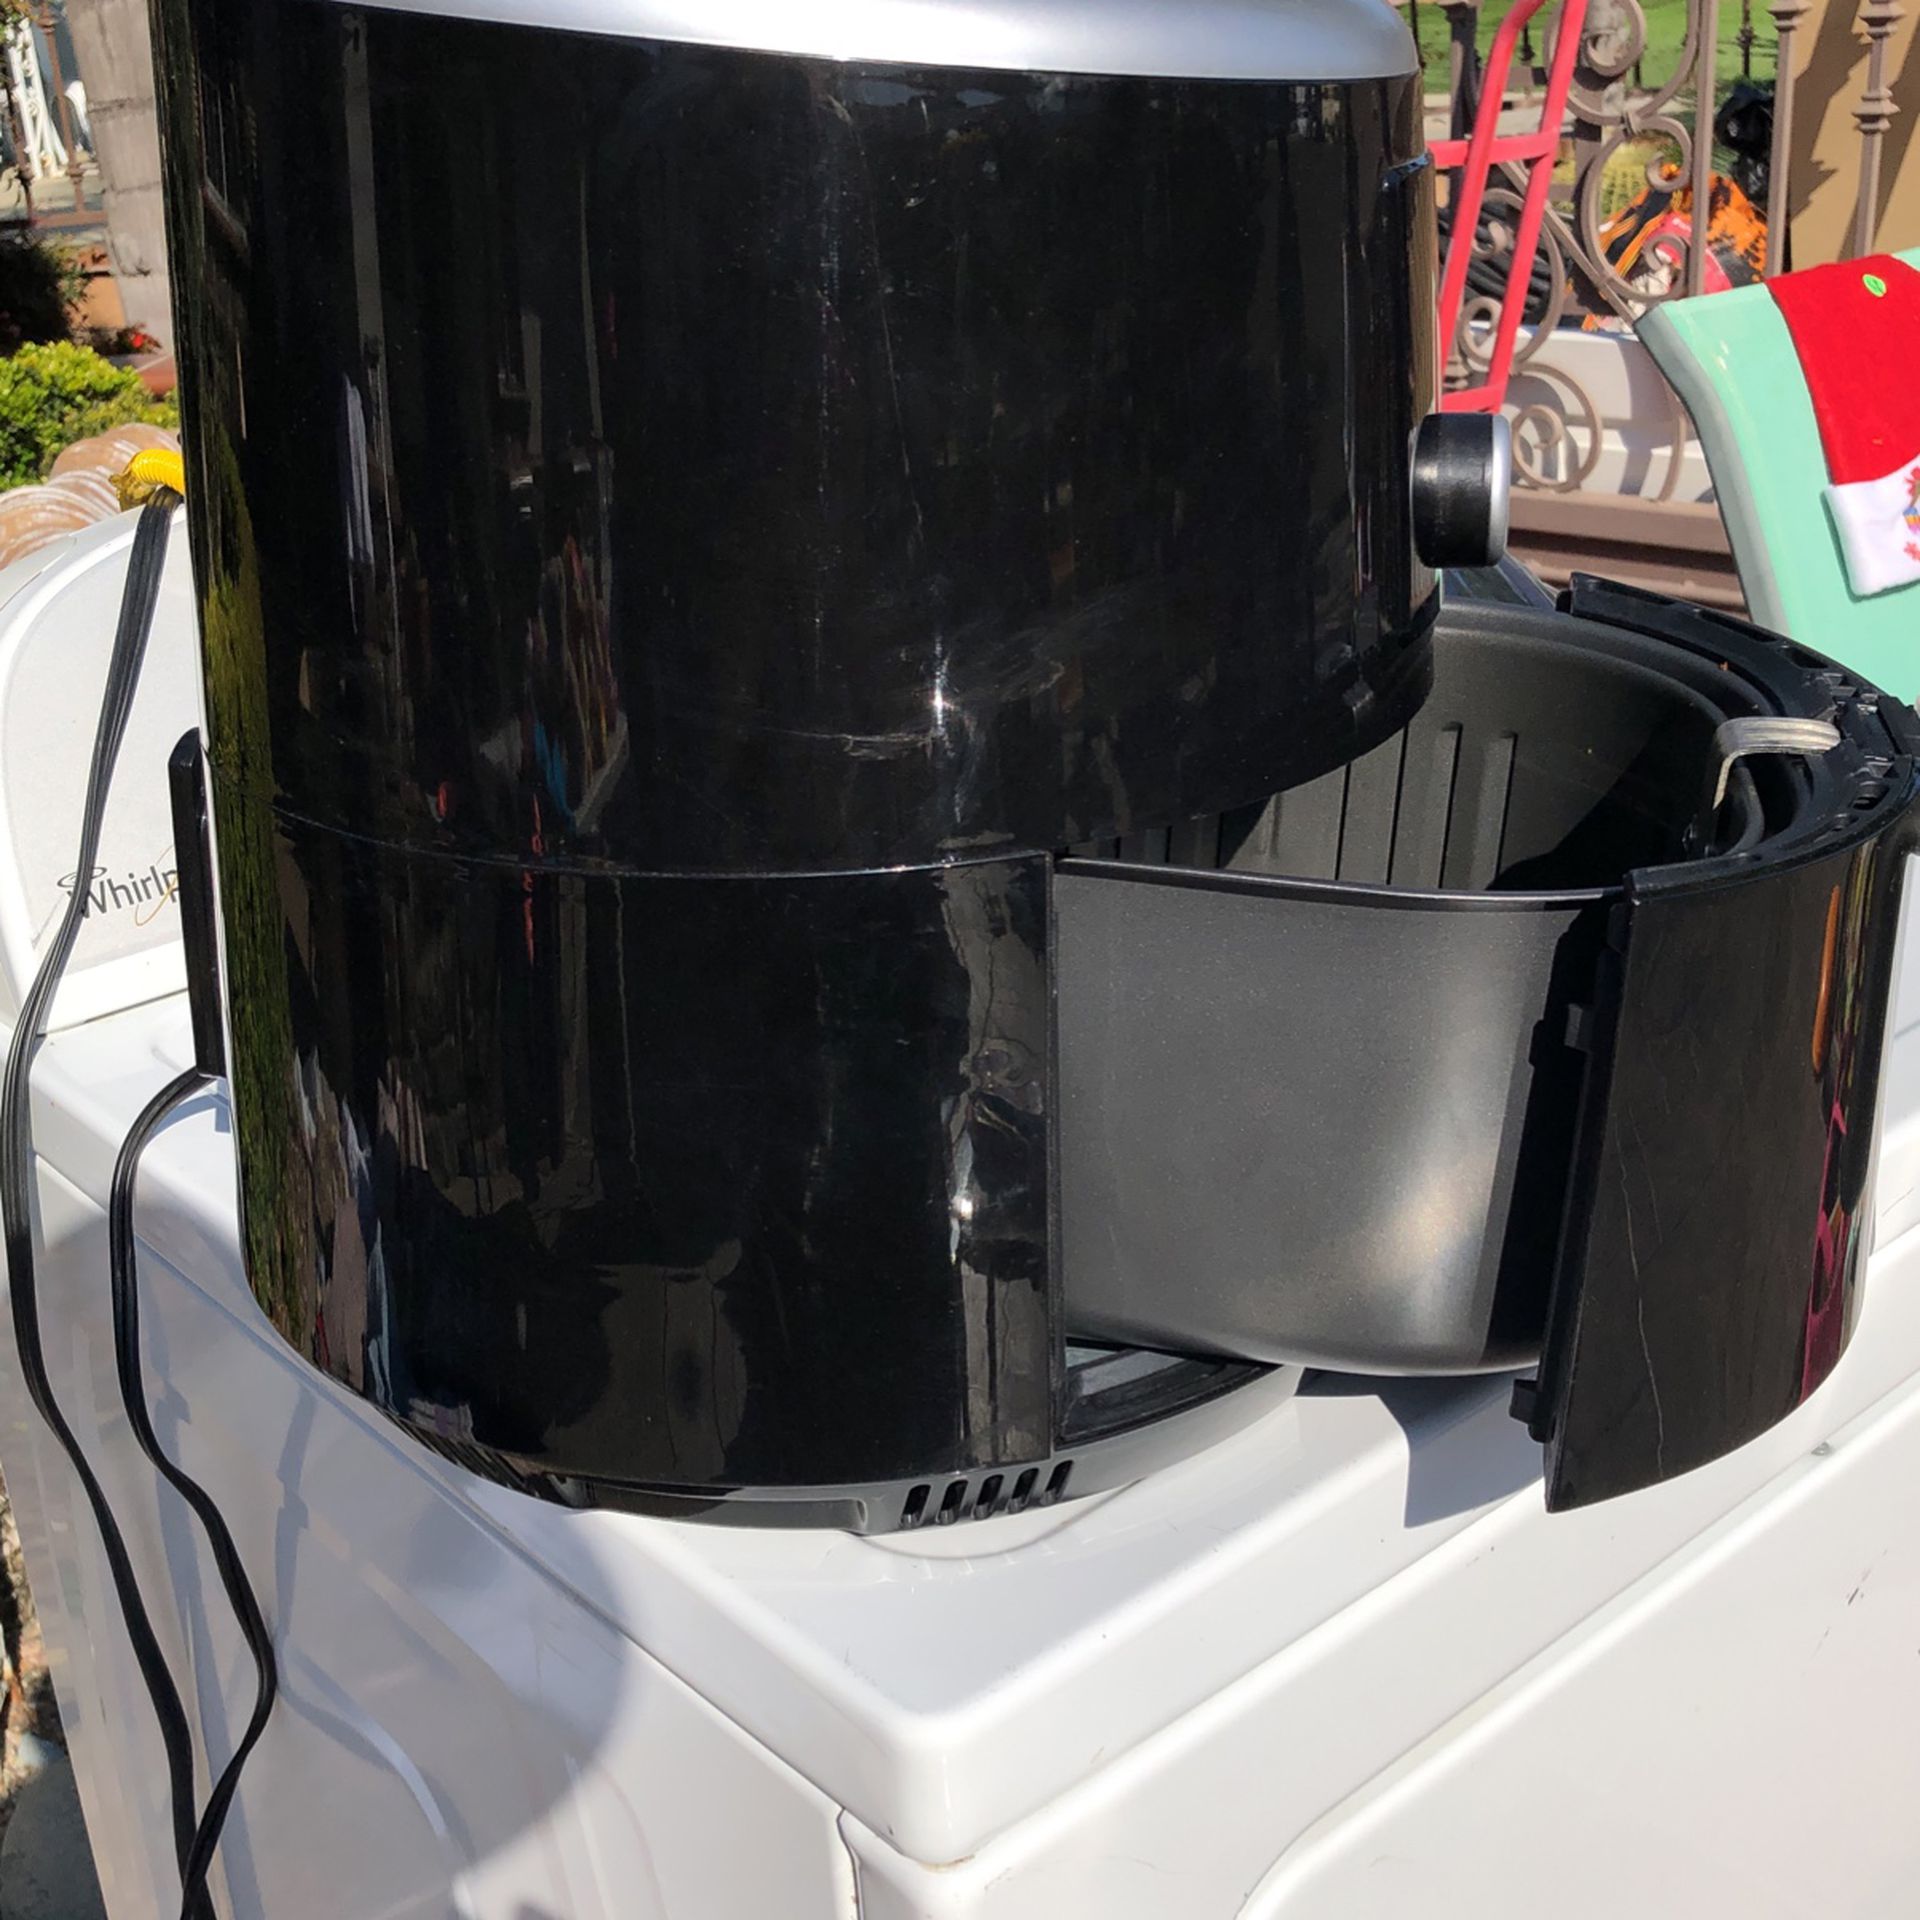 Air Fryer/Smokeless Grill for Sale in Montclair, CA - OfferUp